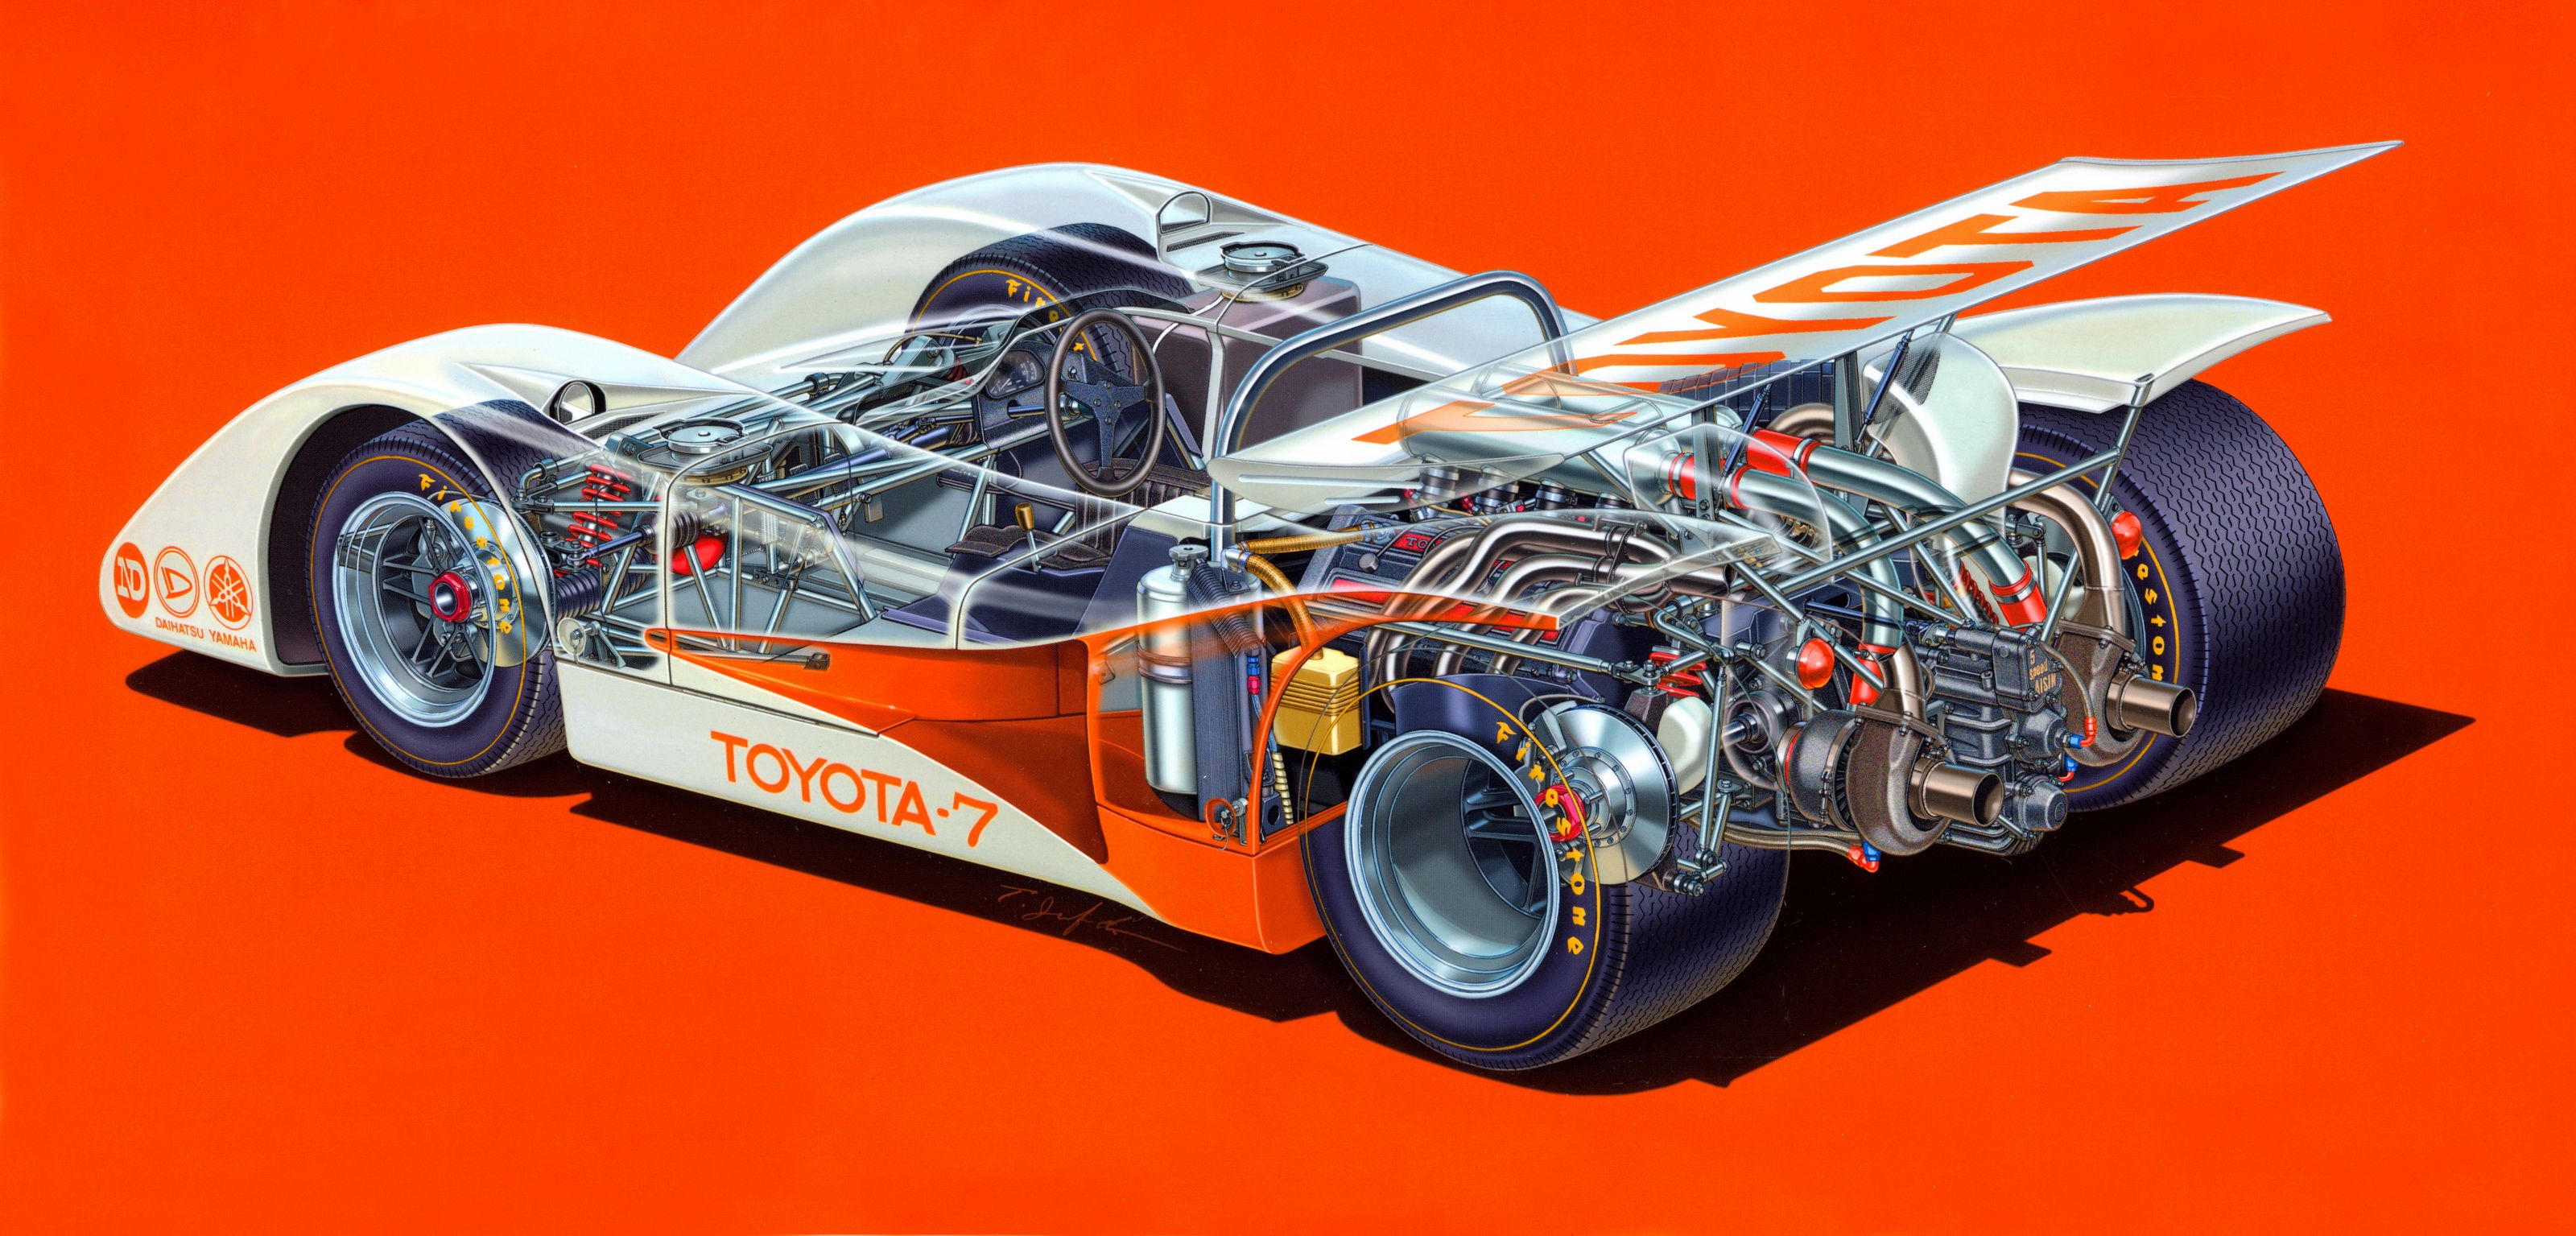 Toyota 7 Pics, Vehicles Collection